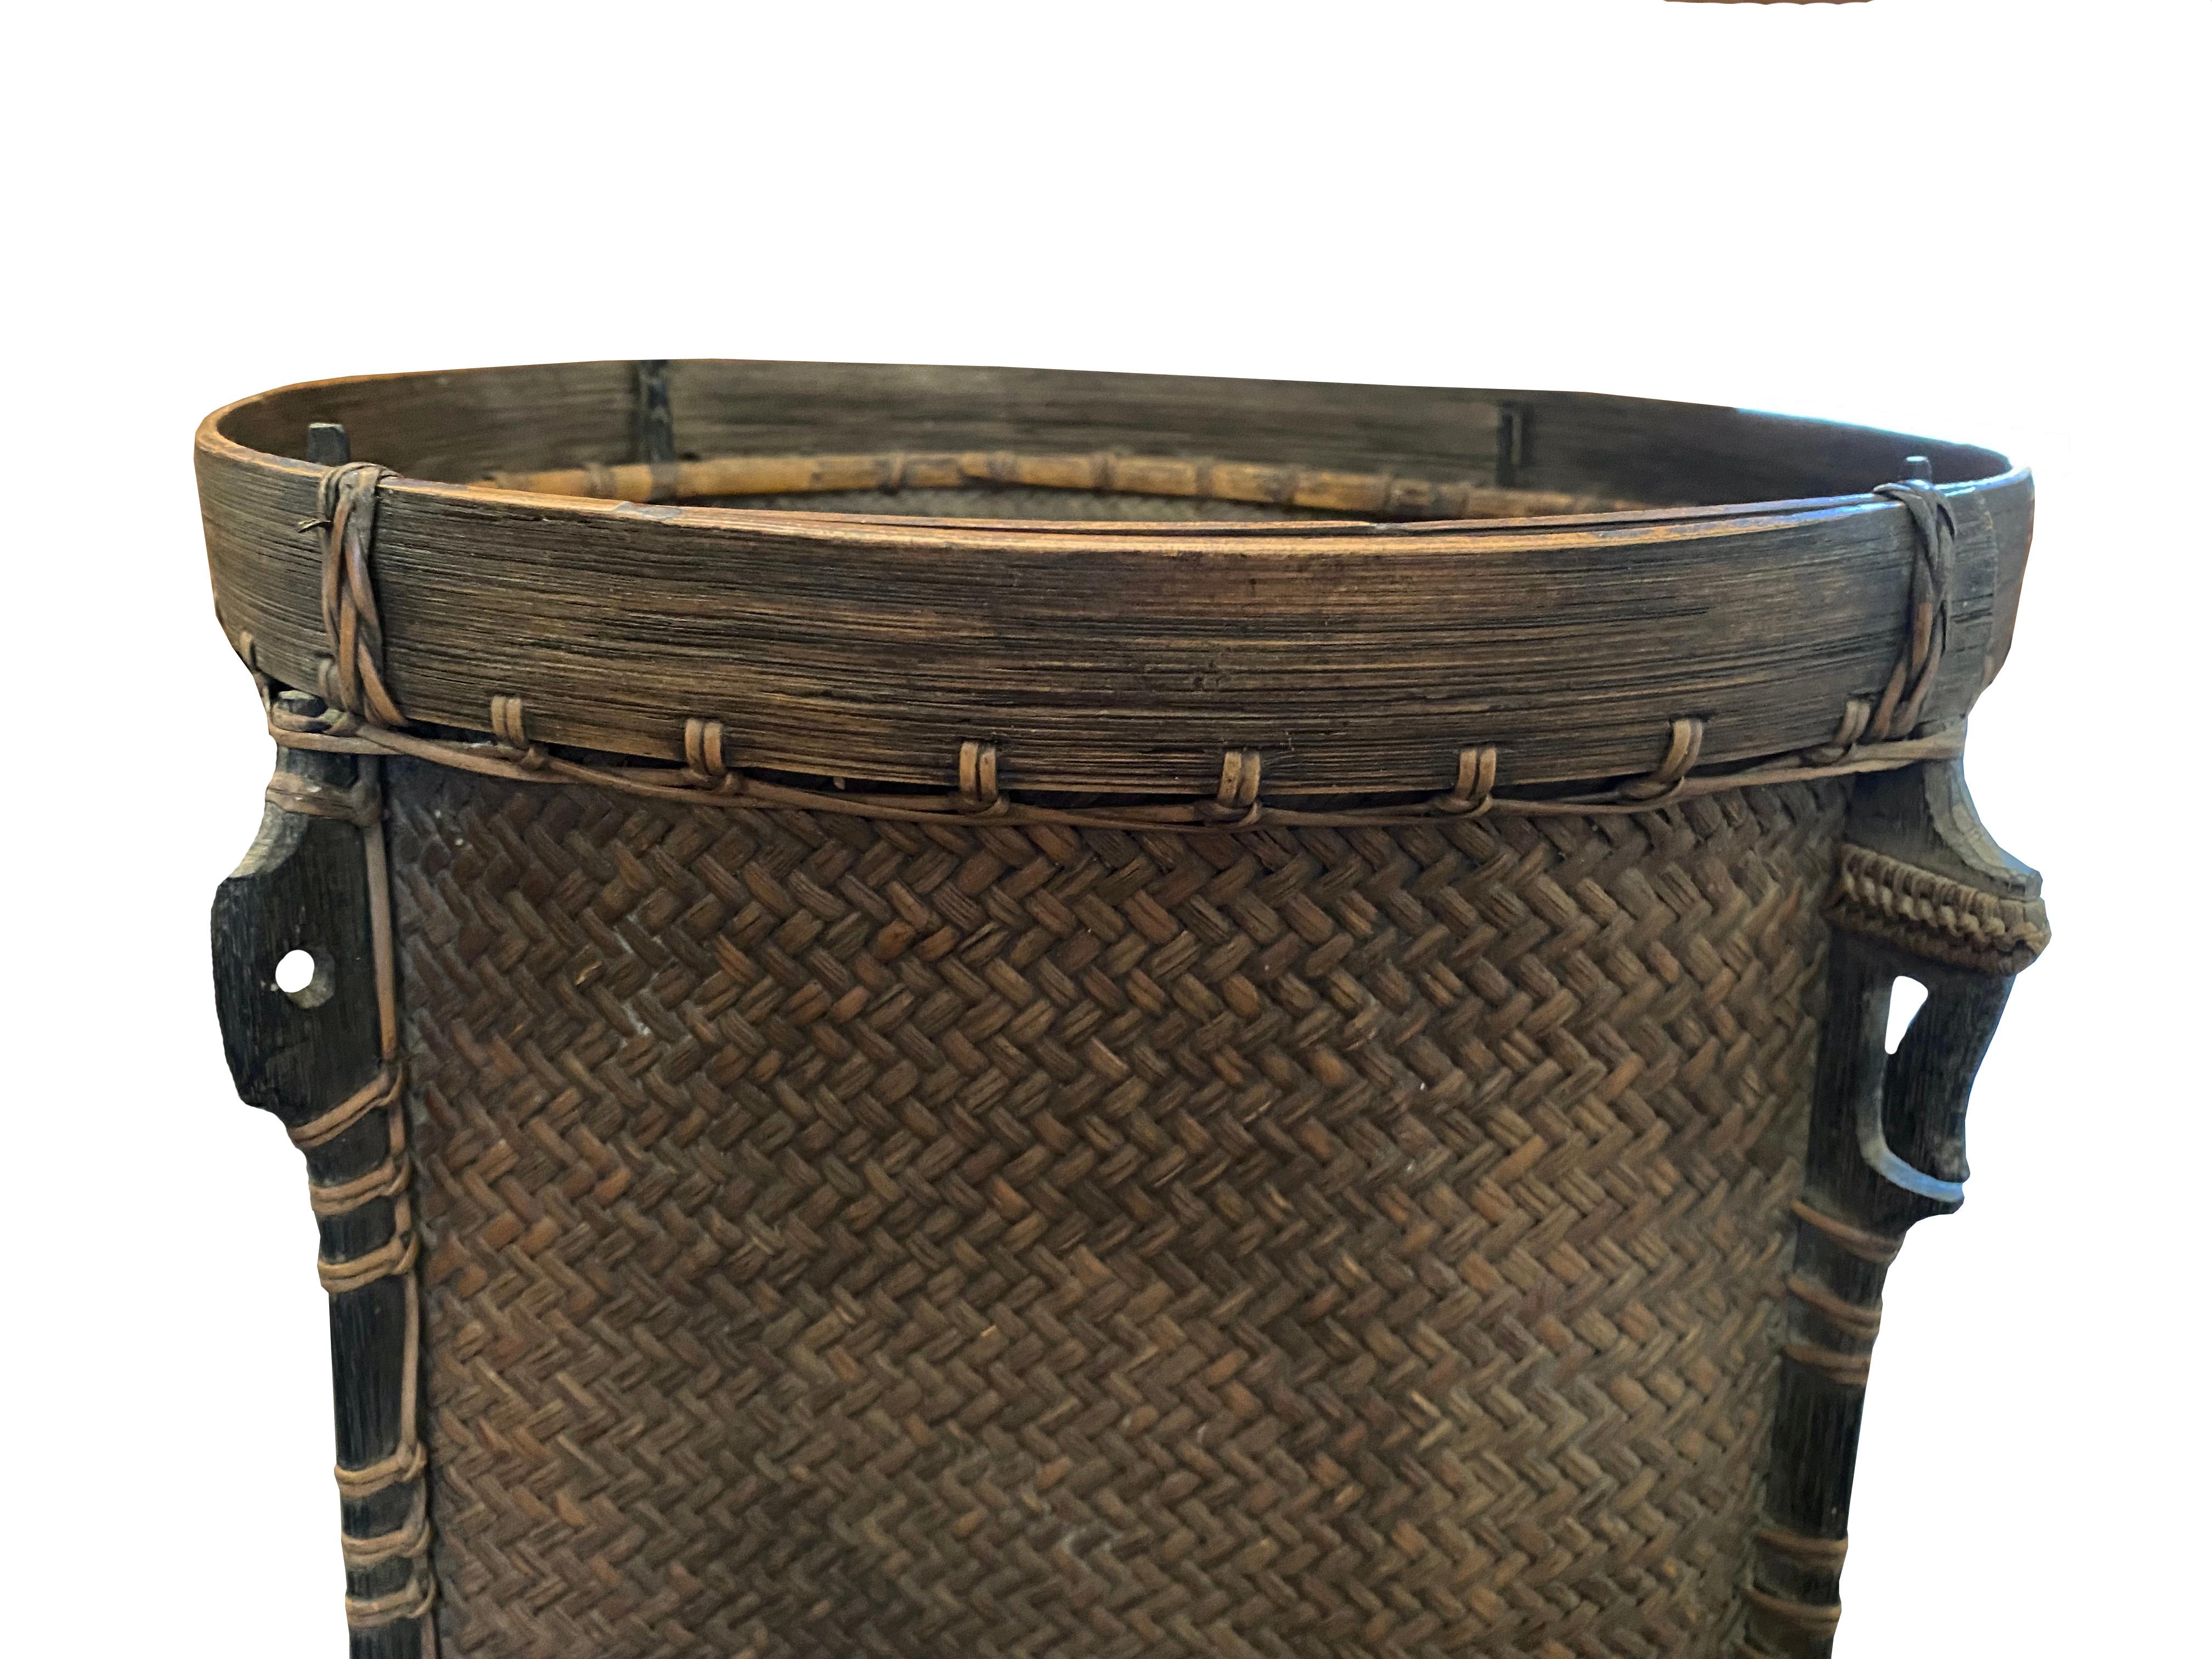 Rattan Basket Dayak Tribe Hand-Woven from Kalimantan, Borneo, Mid 20th Century For Sale 1